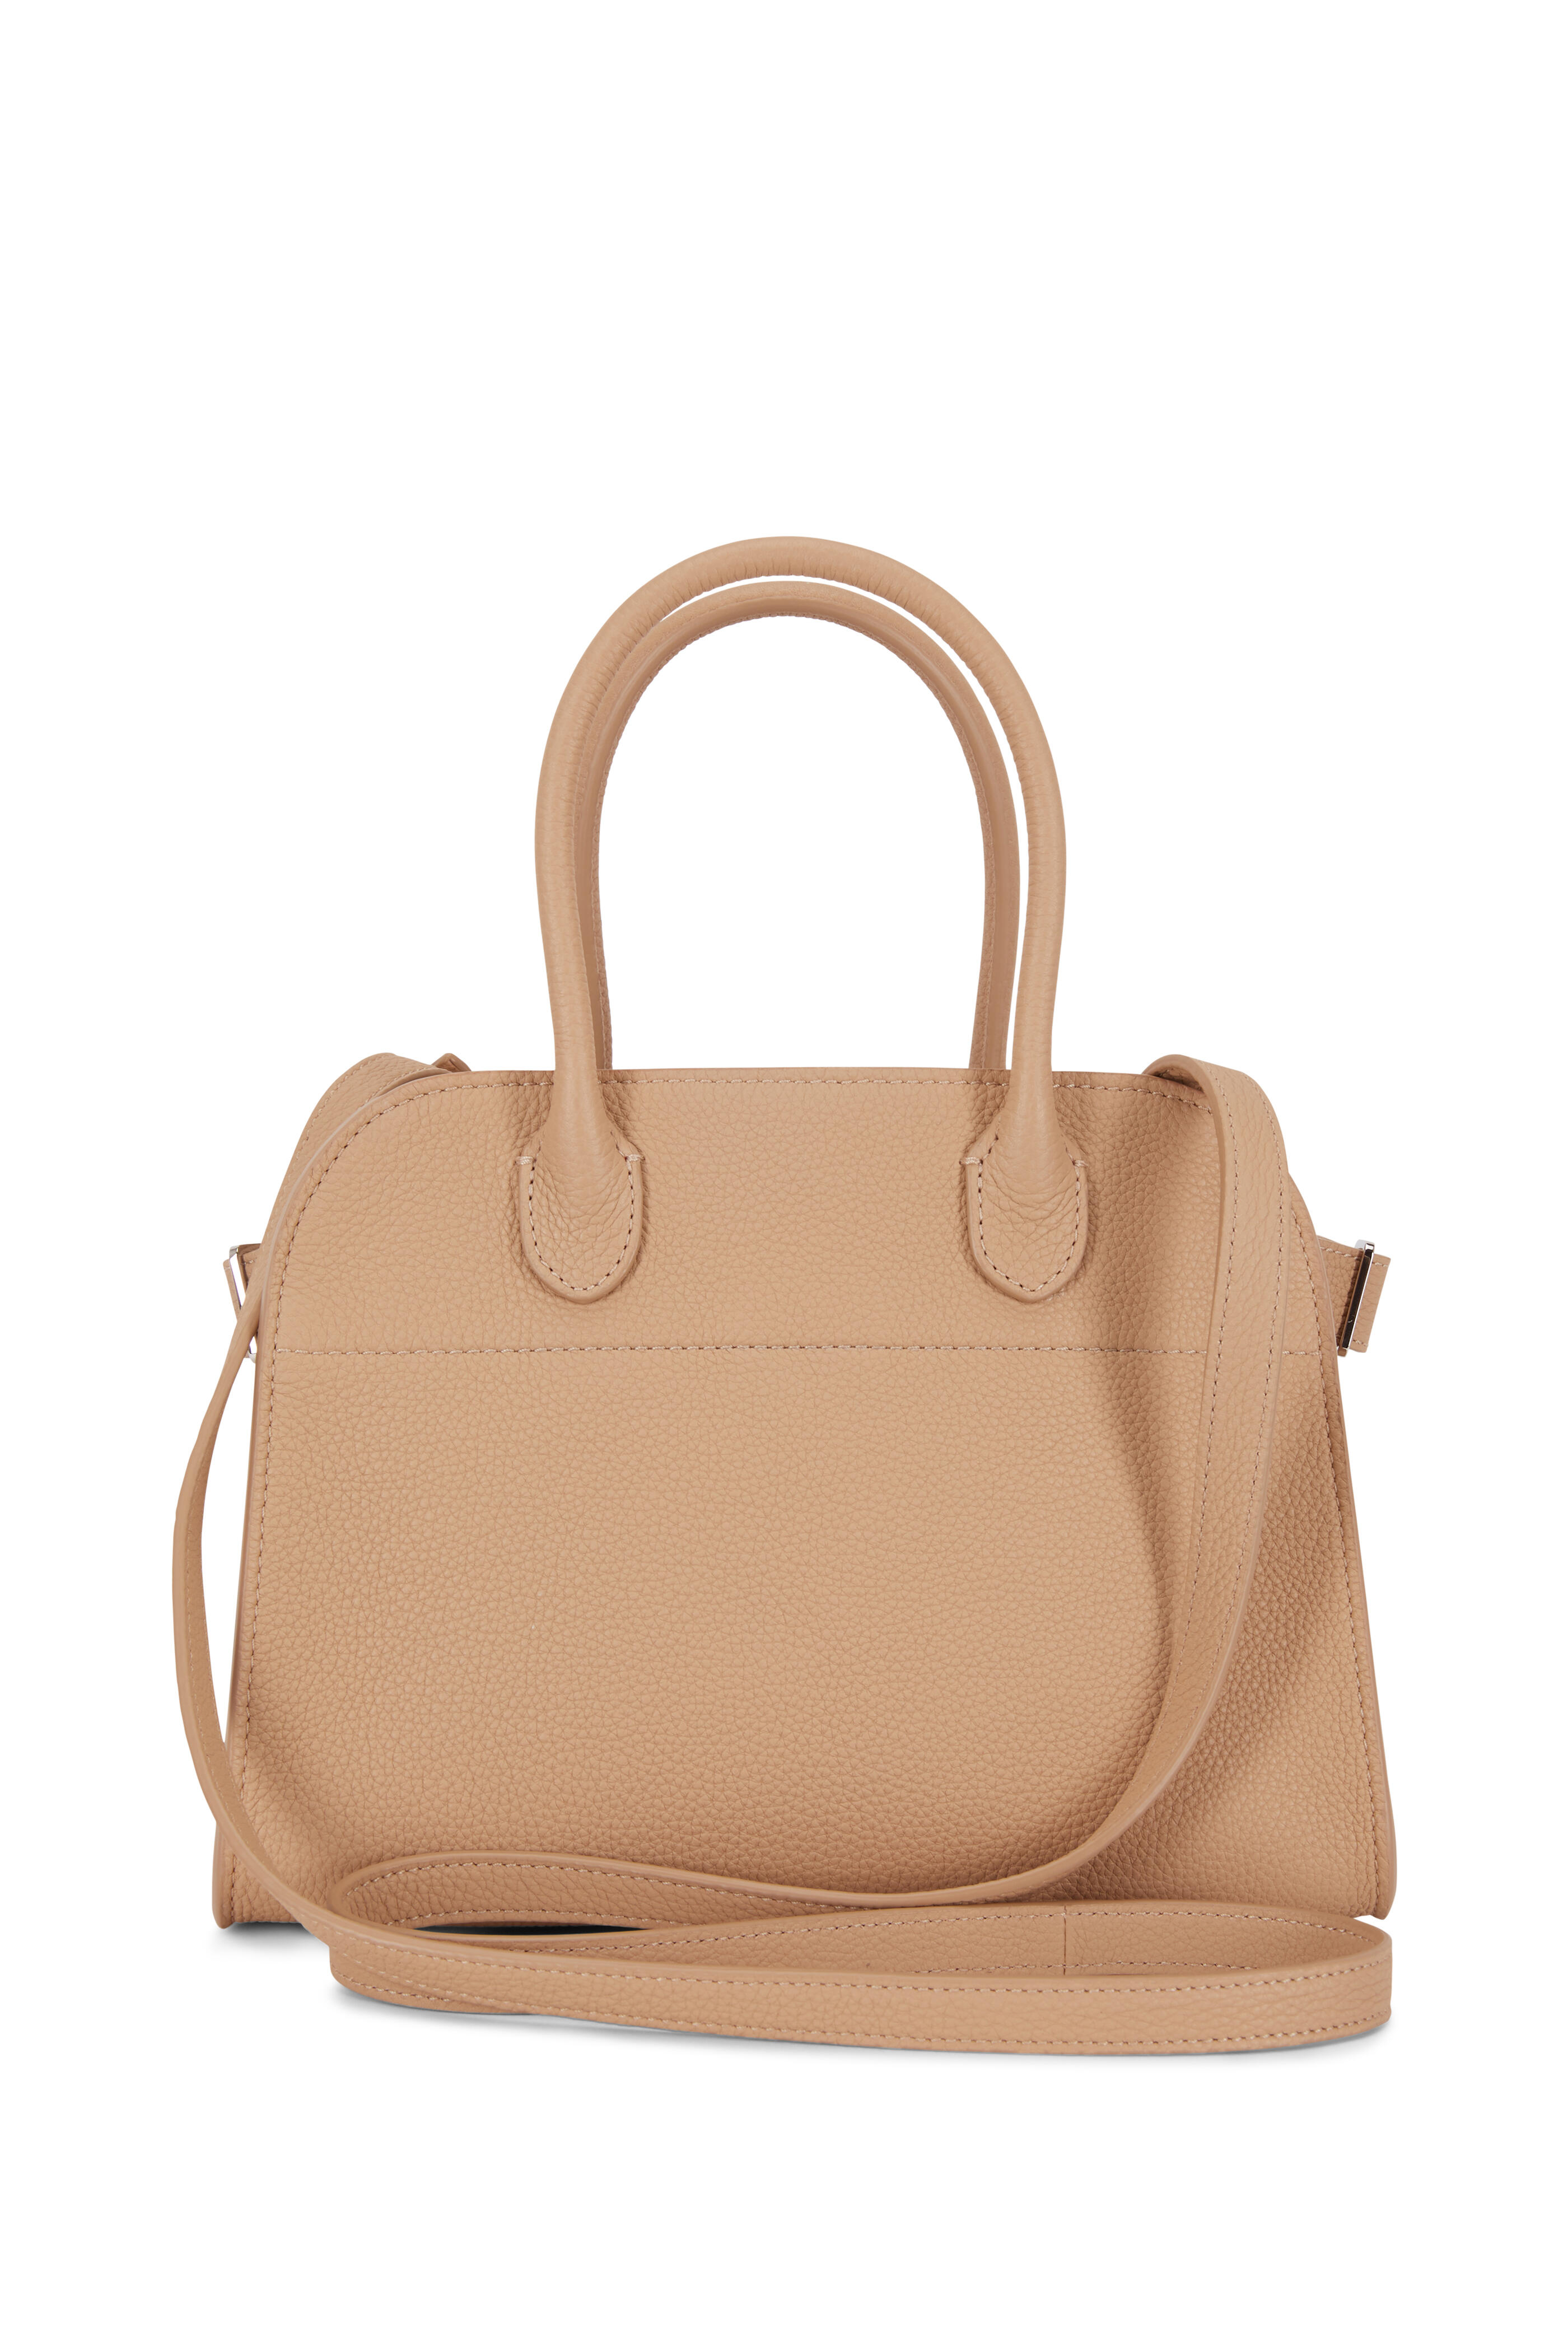 Shop The Row Margaux Soft Margaux 10 Bag in Leather by